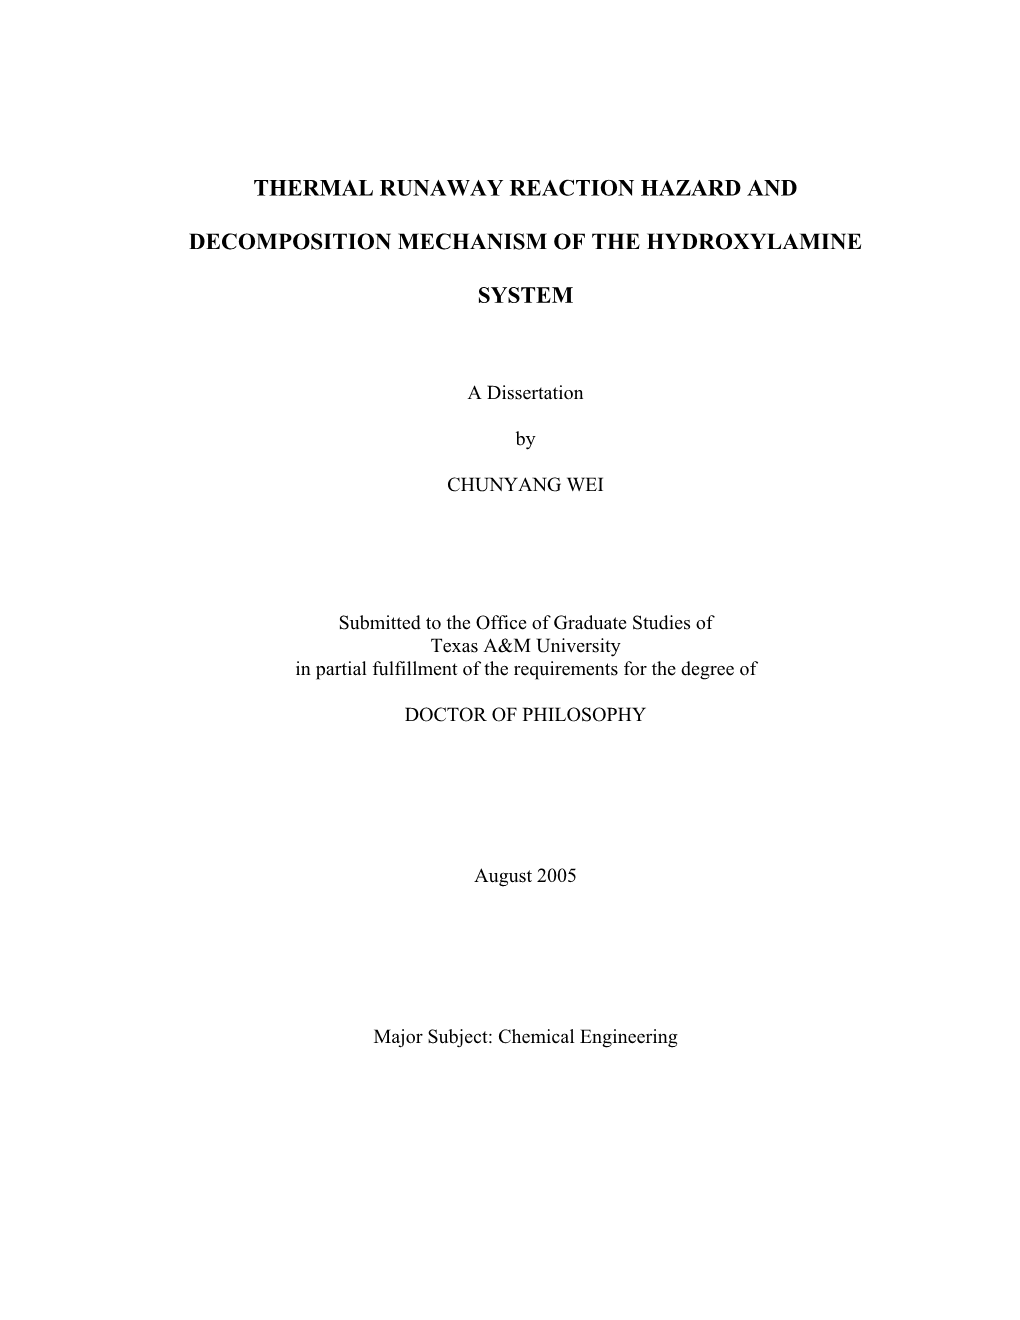 Thermal Runaway Reaction Hazard and Decomposition Mechanism of The